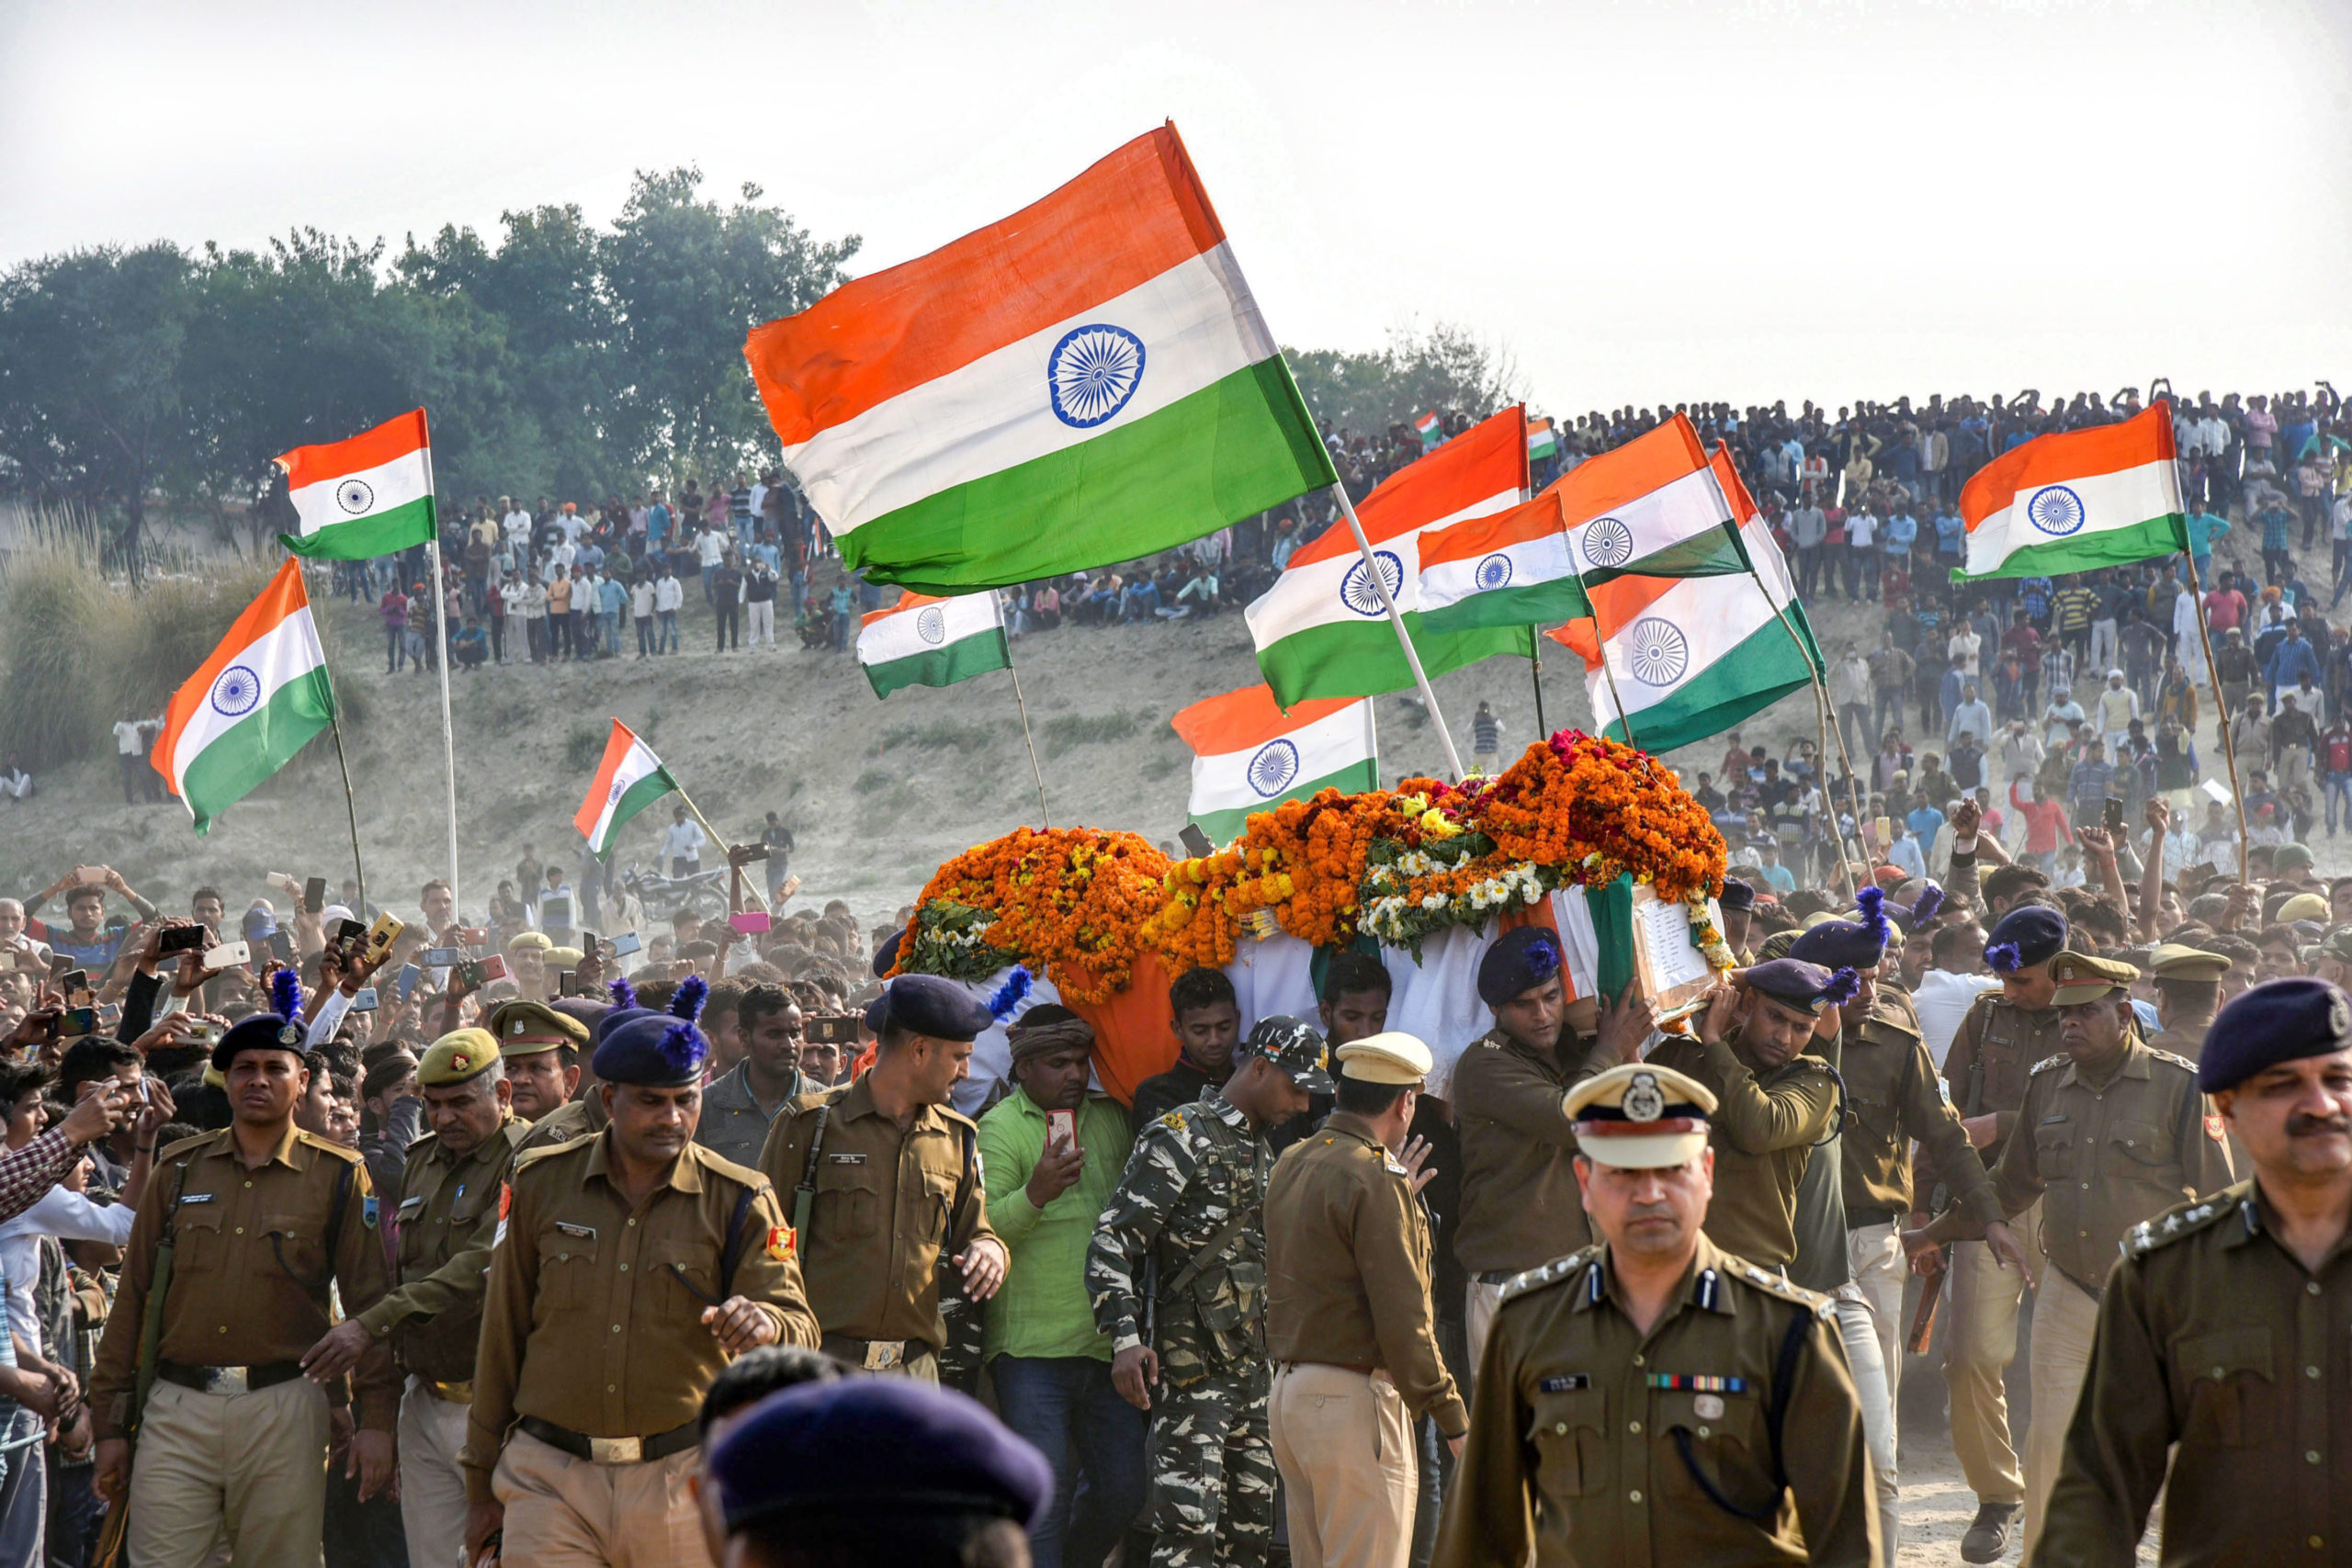 jammu-pulwama-attack-detailed-list-and-name-of-crpf-martyred-jawans-gave-their-life-for-country